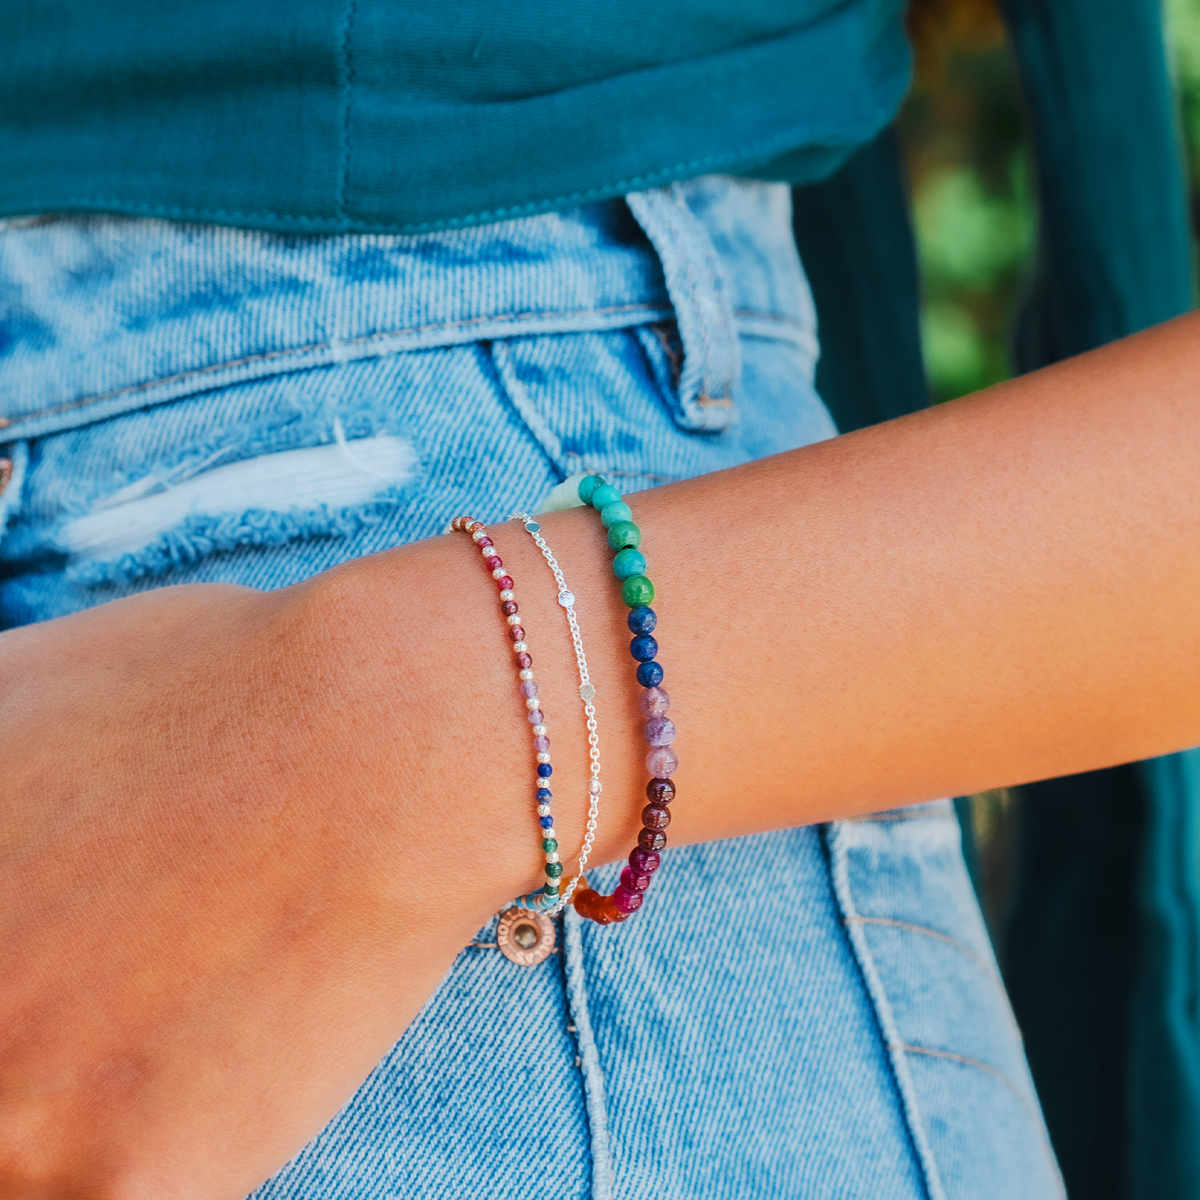 Model wearing a stack of three healing bracelets. The bracelets include a 2mm multicolor stone and gold bead healing bracelet, a silver chain bracelet and a 4mm multicolor stone healing bracelet